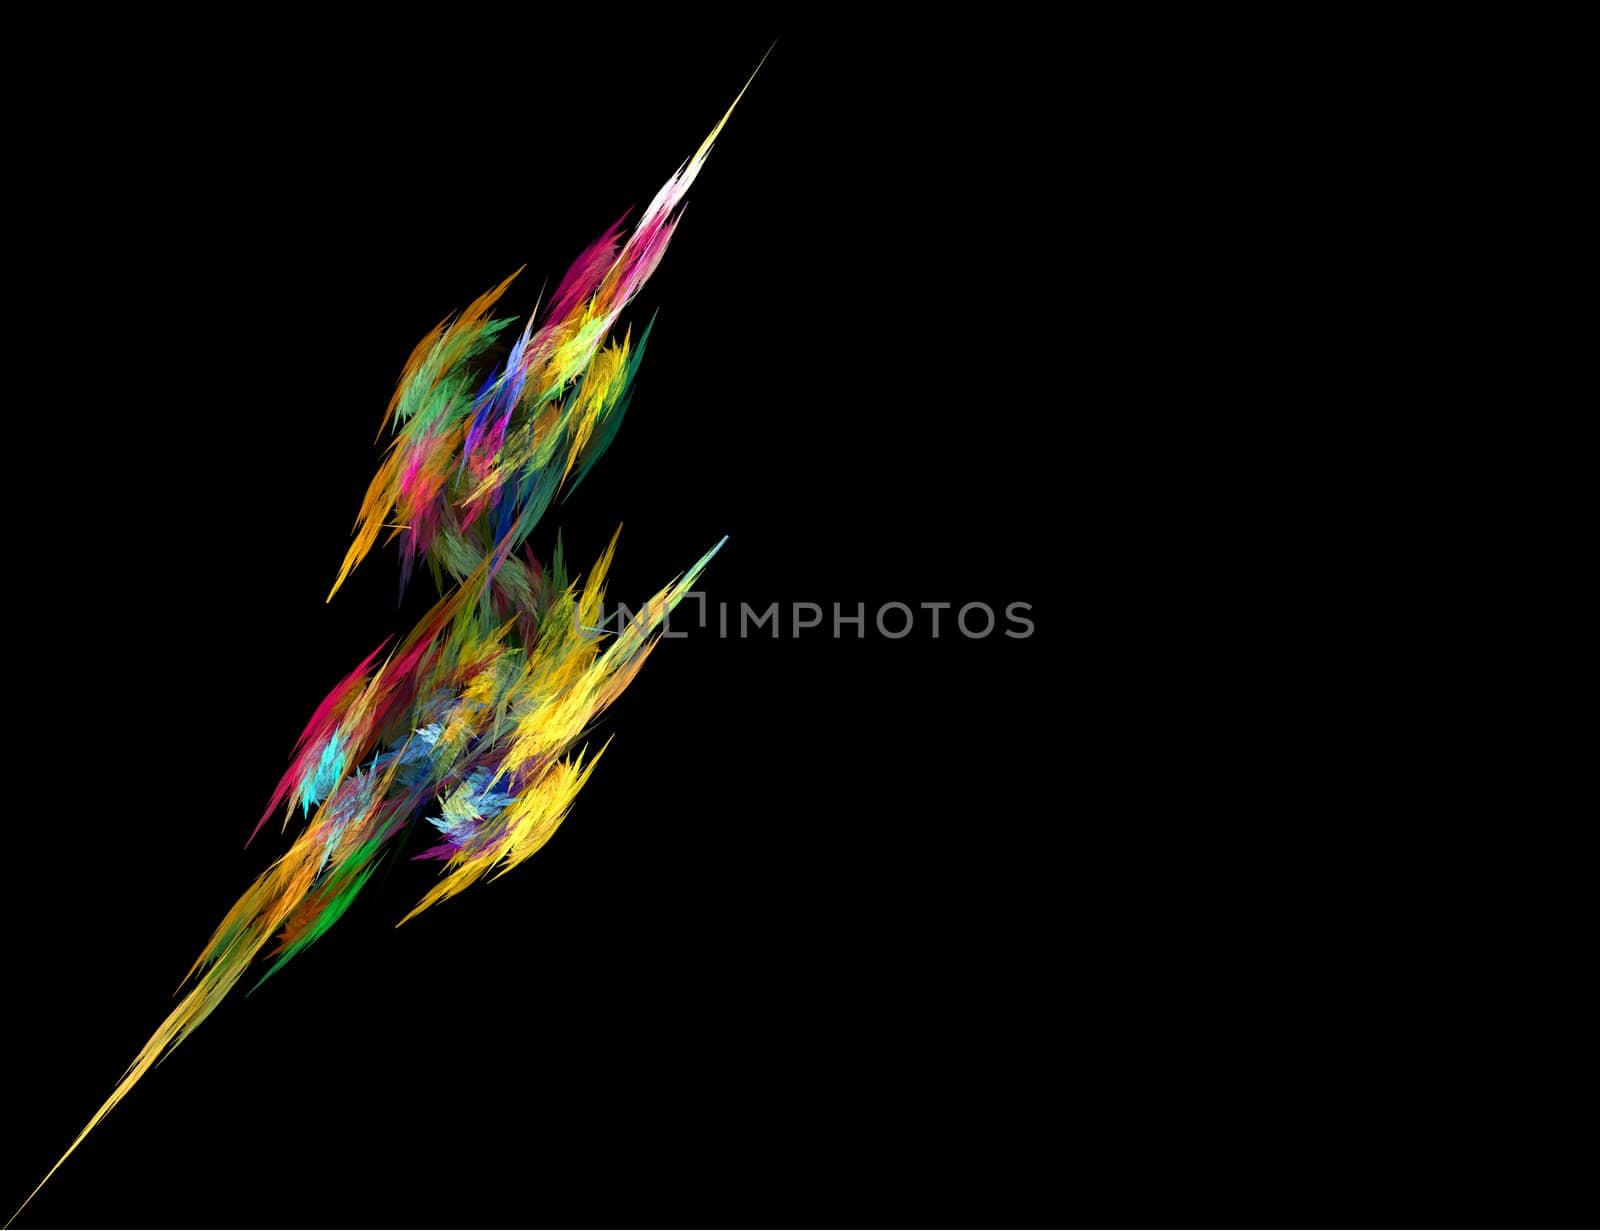 Colorful Abstract Crystal Lightning on Black Background